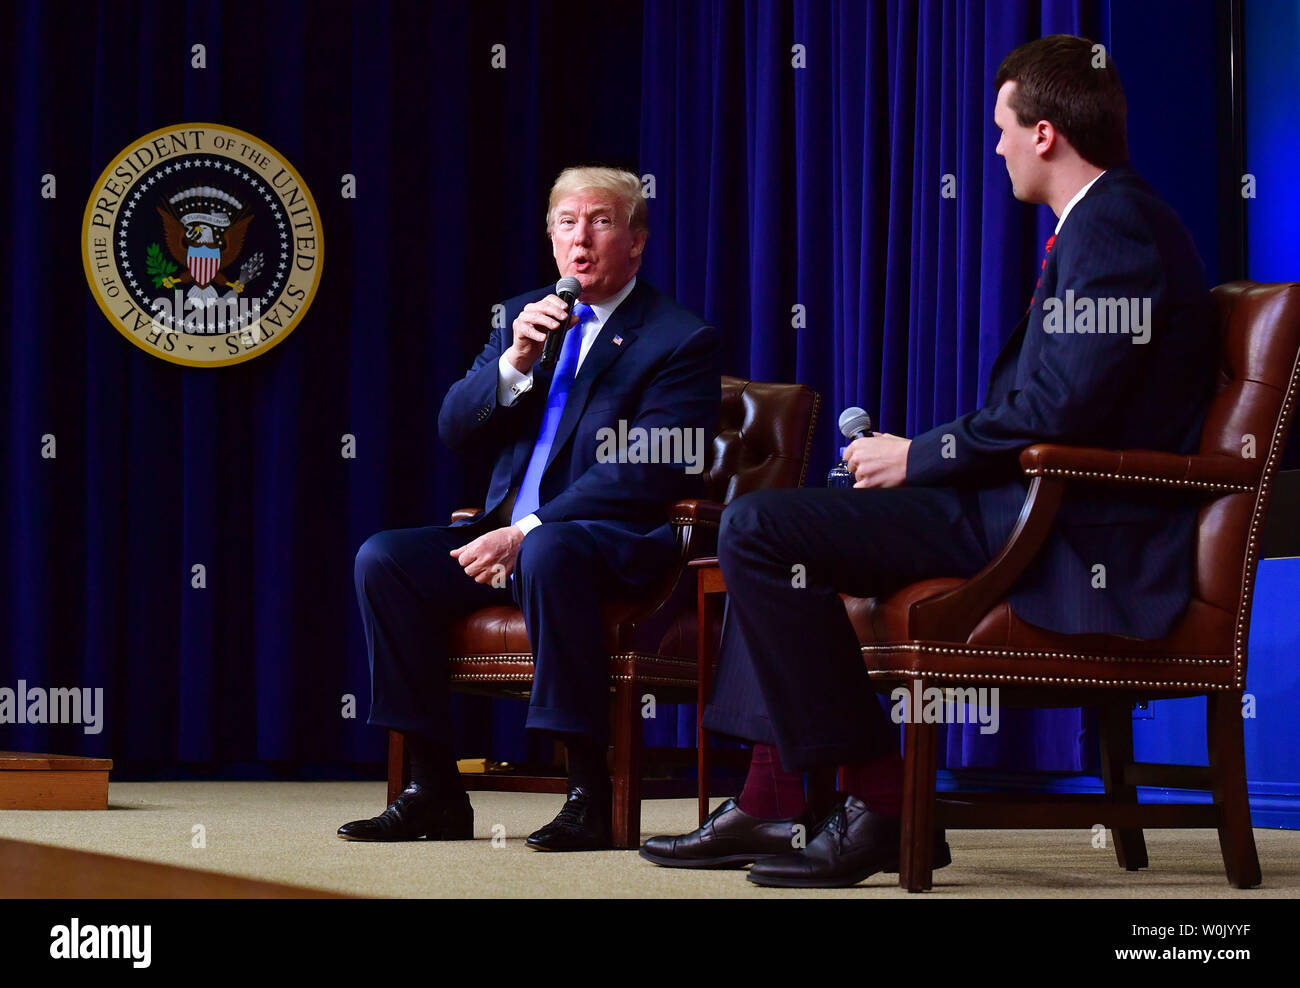 President Donald Trump participates in a question and answer session with Charlie Kirk, Director of Turning Point USA, during the Generation Next Summit at the Eisenhower Executive Office Building in Washington, D.C. on March 22, 2018. The summit brought together millennials and administration officials to discuss important policy issues including the economy and jobs and college campus issues. Photo by Kevin Dietsch/UPI Stock Photo